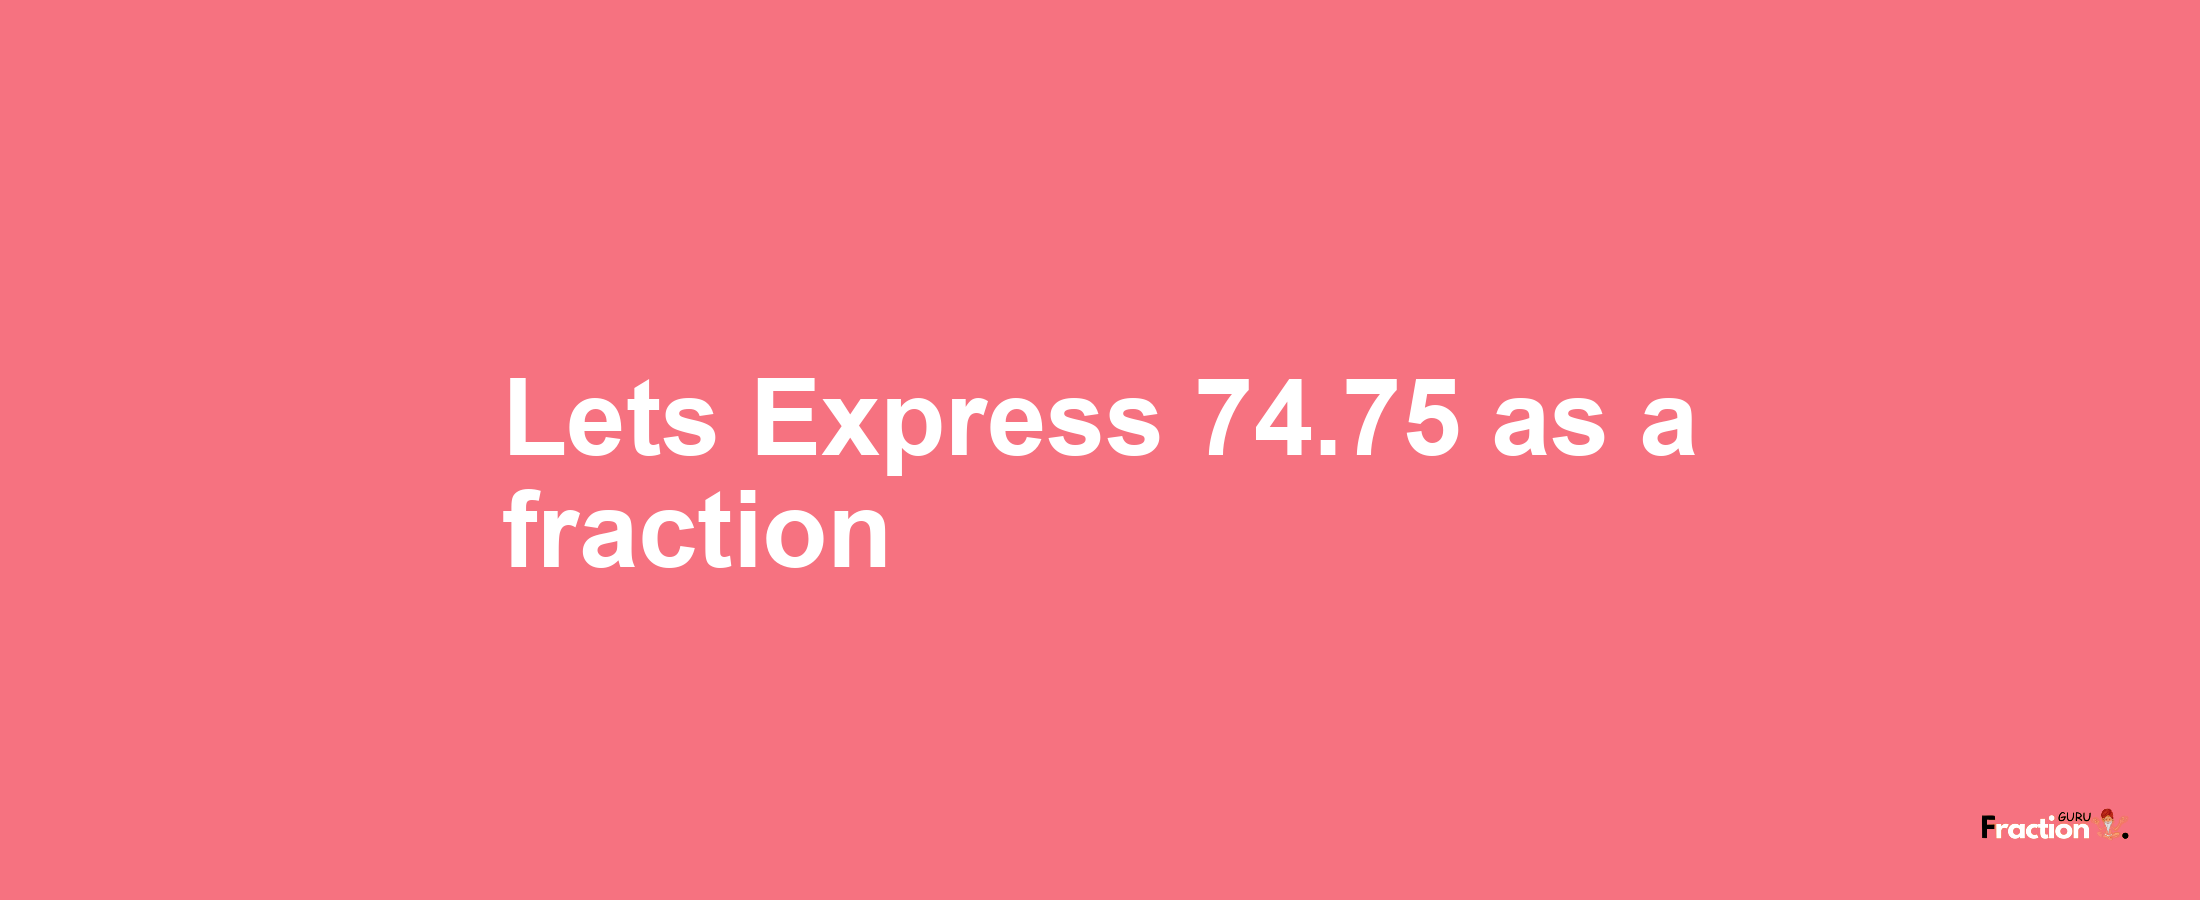 Lets Express 74.75 as afraction